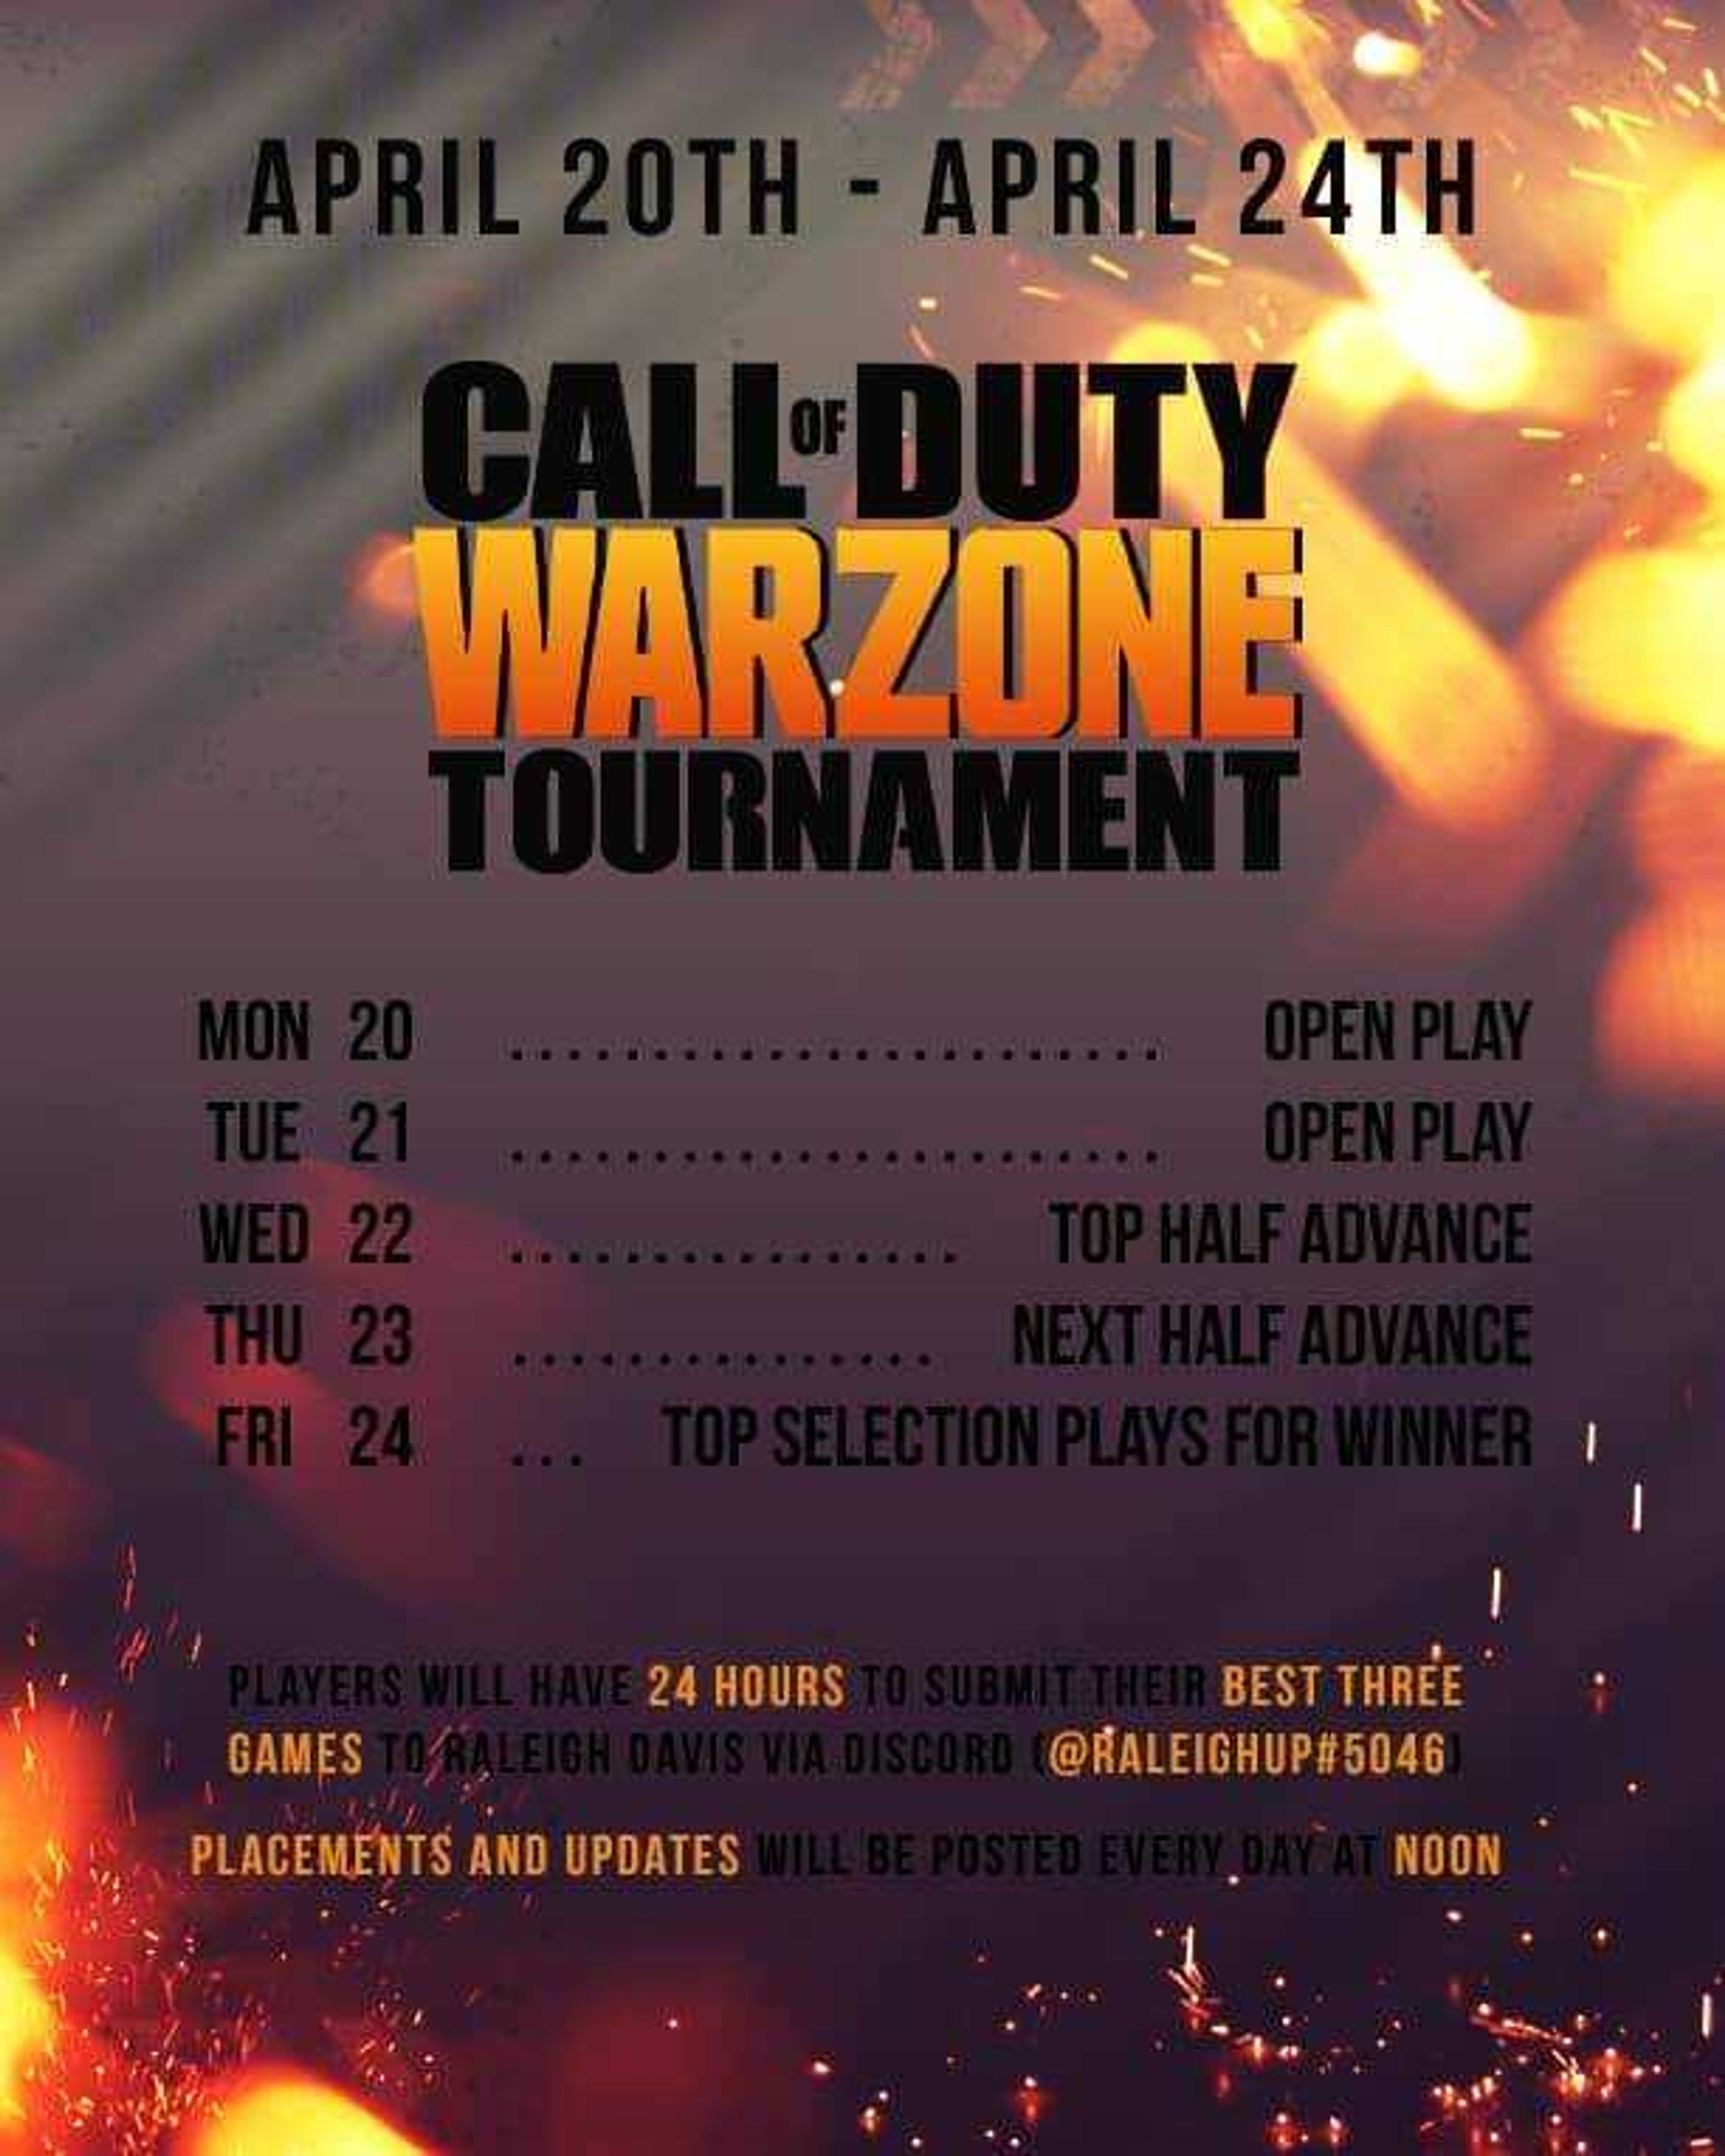 Southeast esports club is hosting a Call of Duty Warzone Tournament April 20th-24th Photo from Facebook.